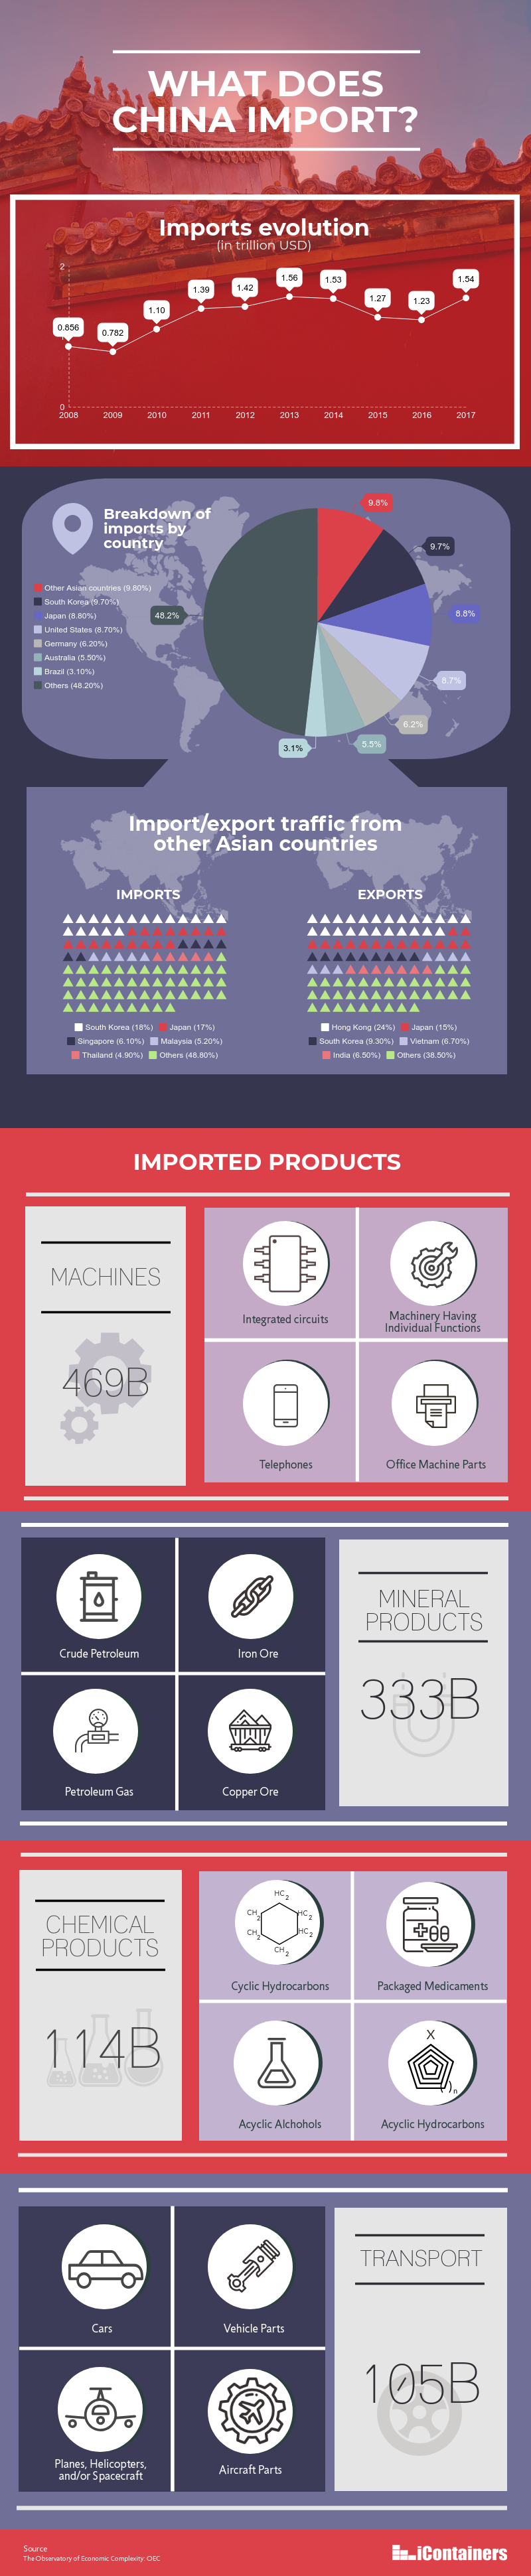 what-does-china-import-infographic.png